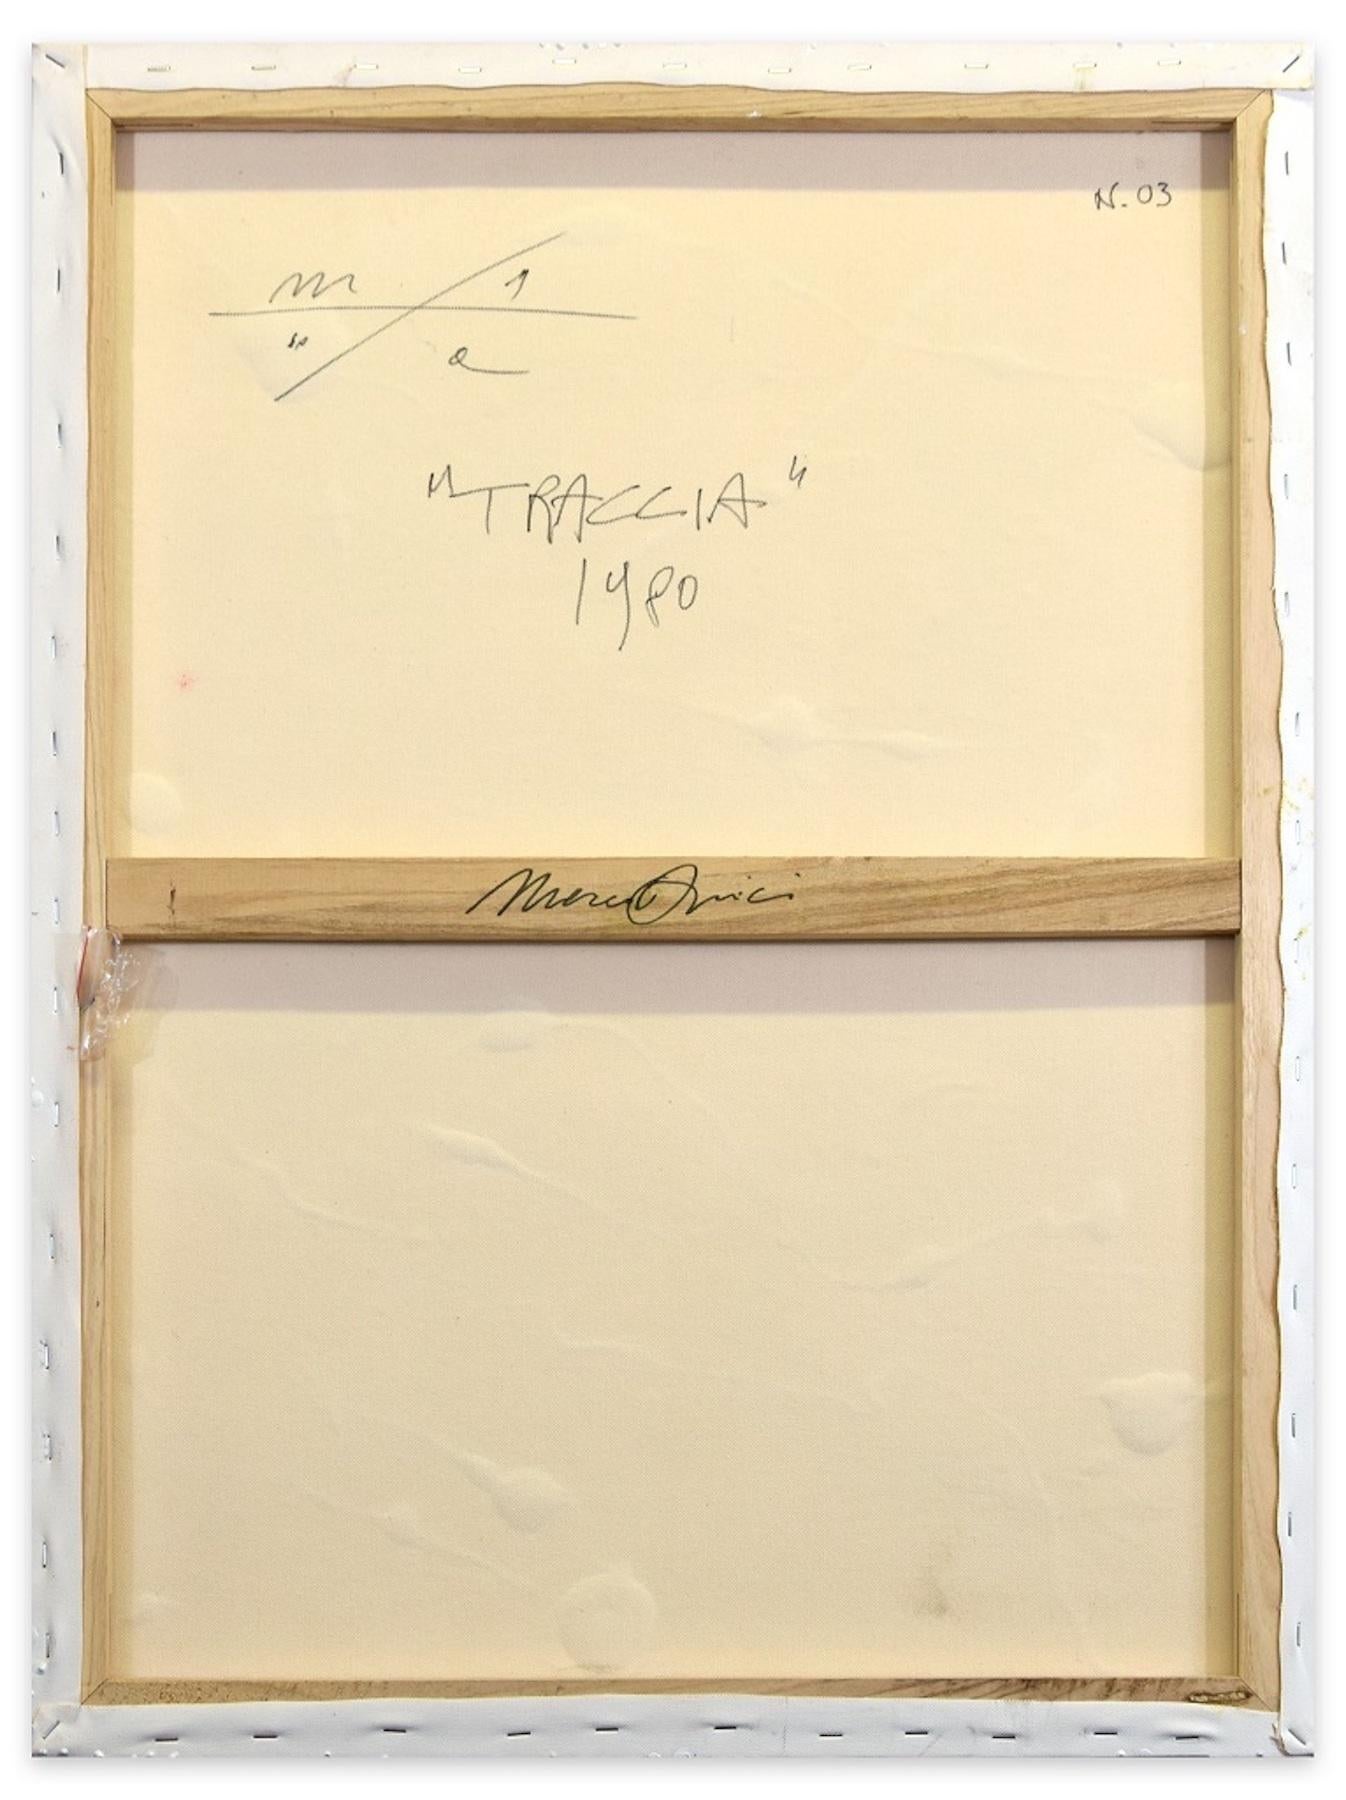 Trace is an original mixed media painting on panel realized by the Italian artist Marco Amici in 1980.

Original Title: Traccia

Title, Signature, date and monograms are written by the artist in black marker on the back of the canvas. 

This